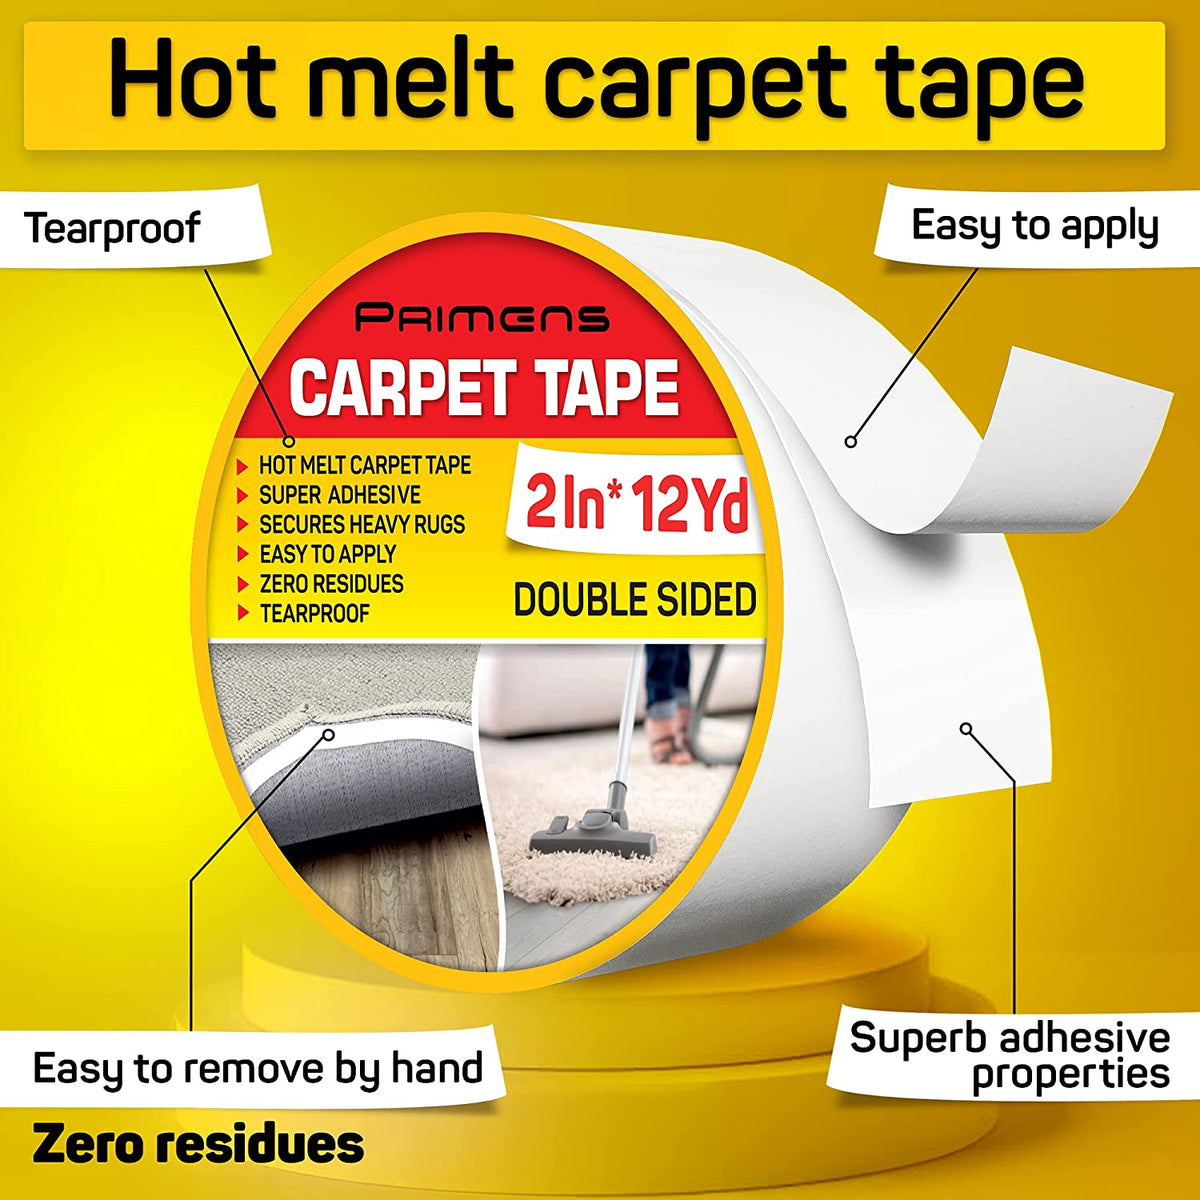 Trazon Carpet Tape Double Sided - Rug Tape Grippers for Hardwood Floors and  A